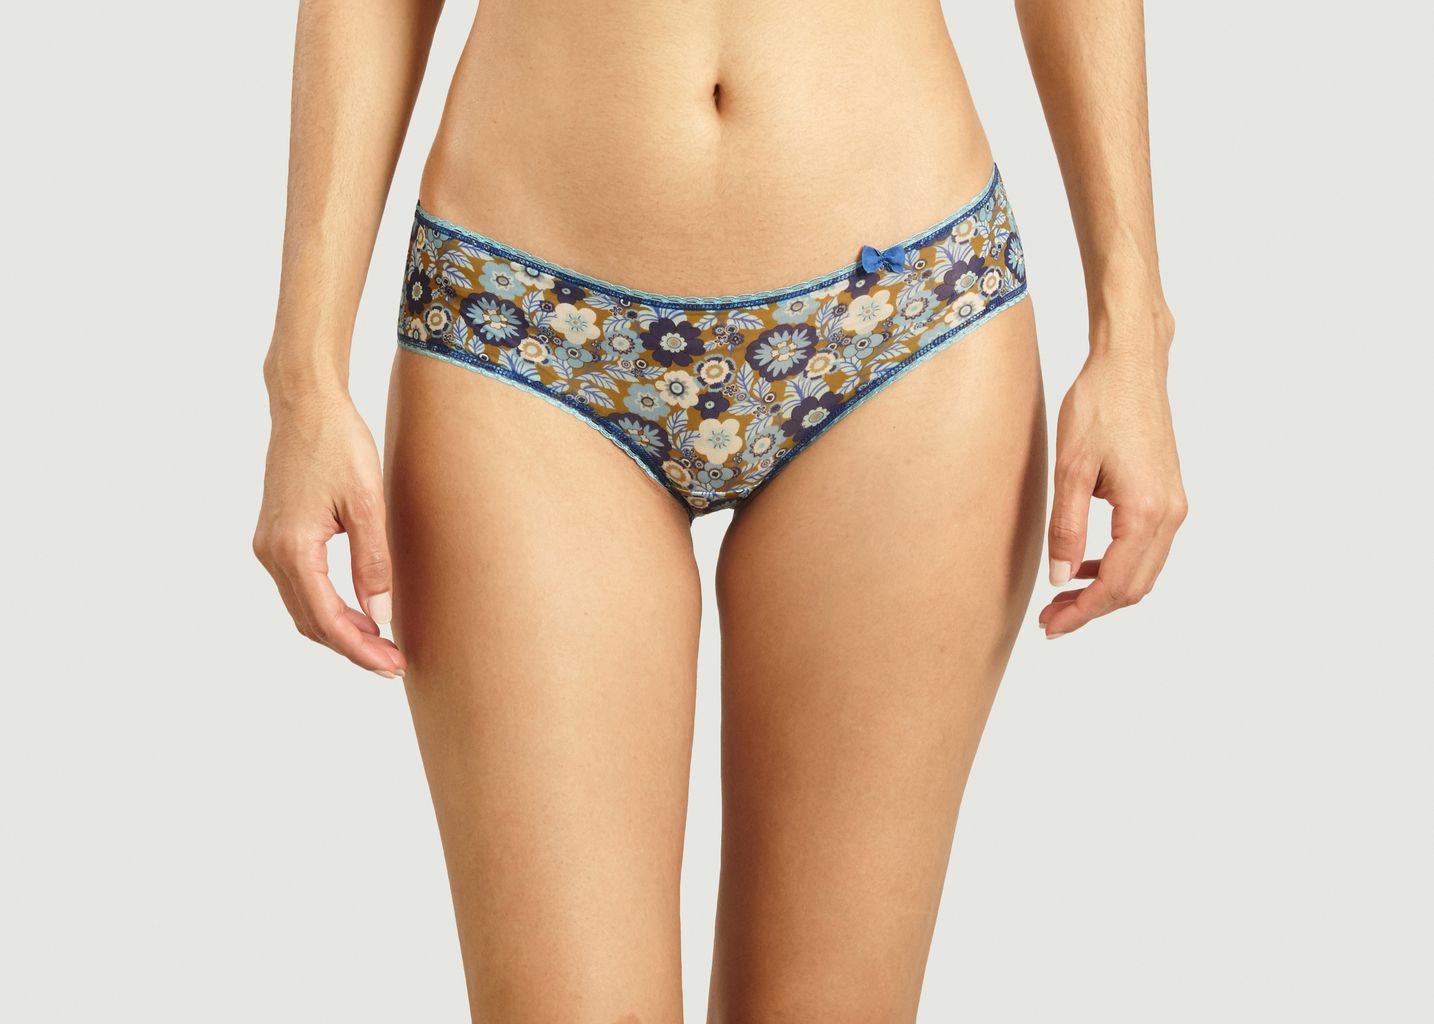 Floral pattern panties with bow - Momoni